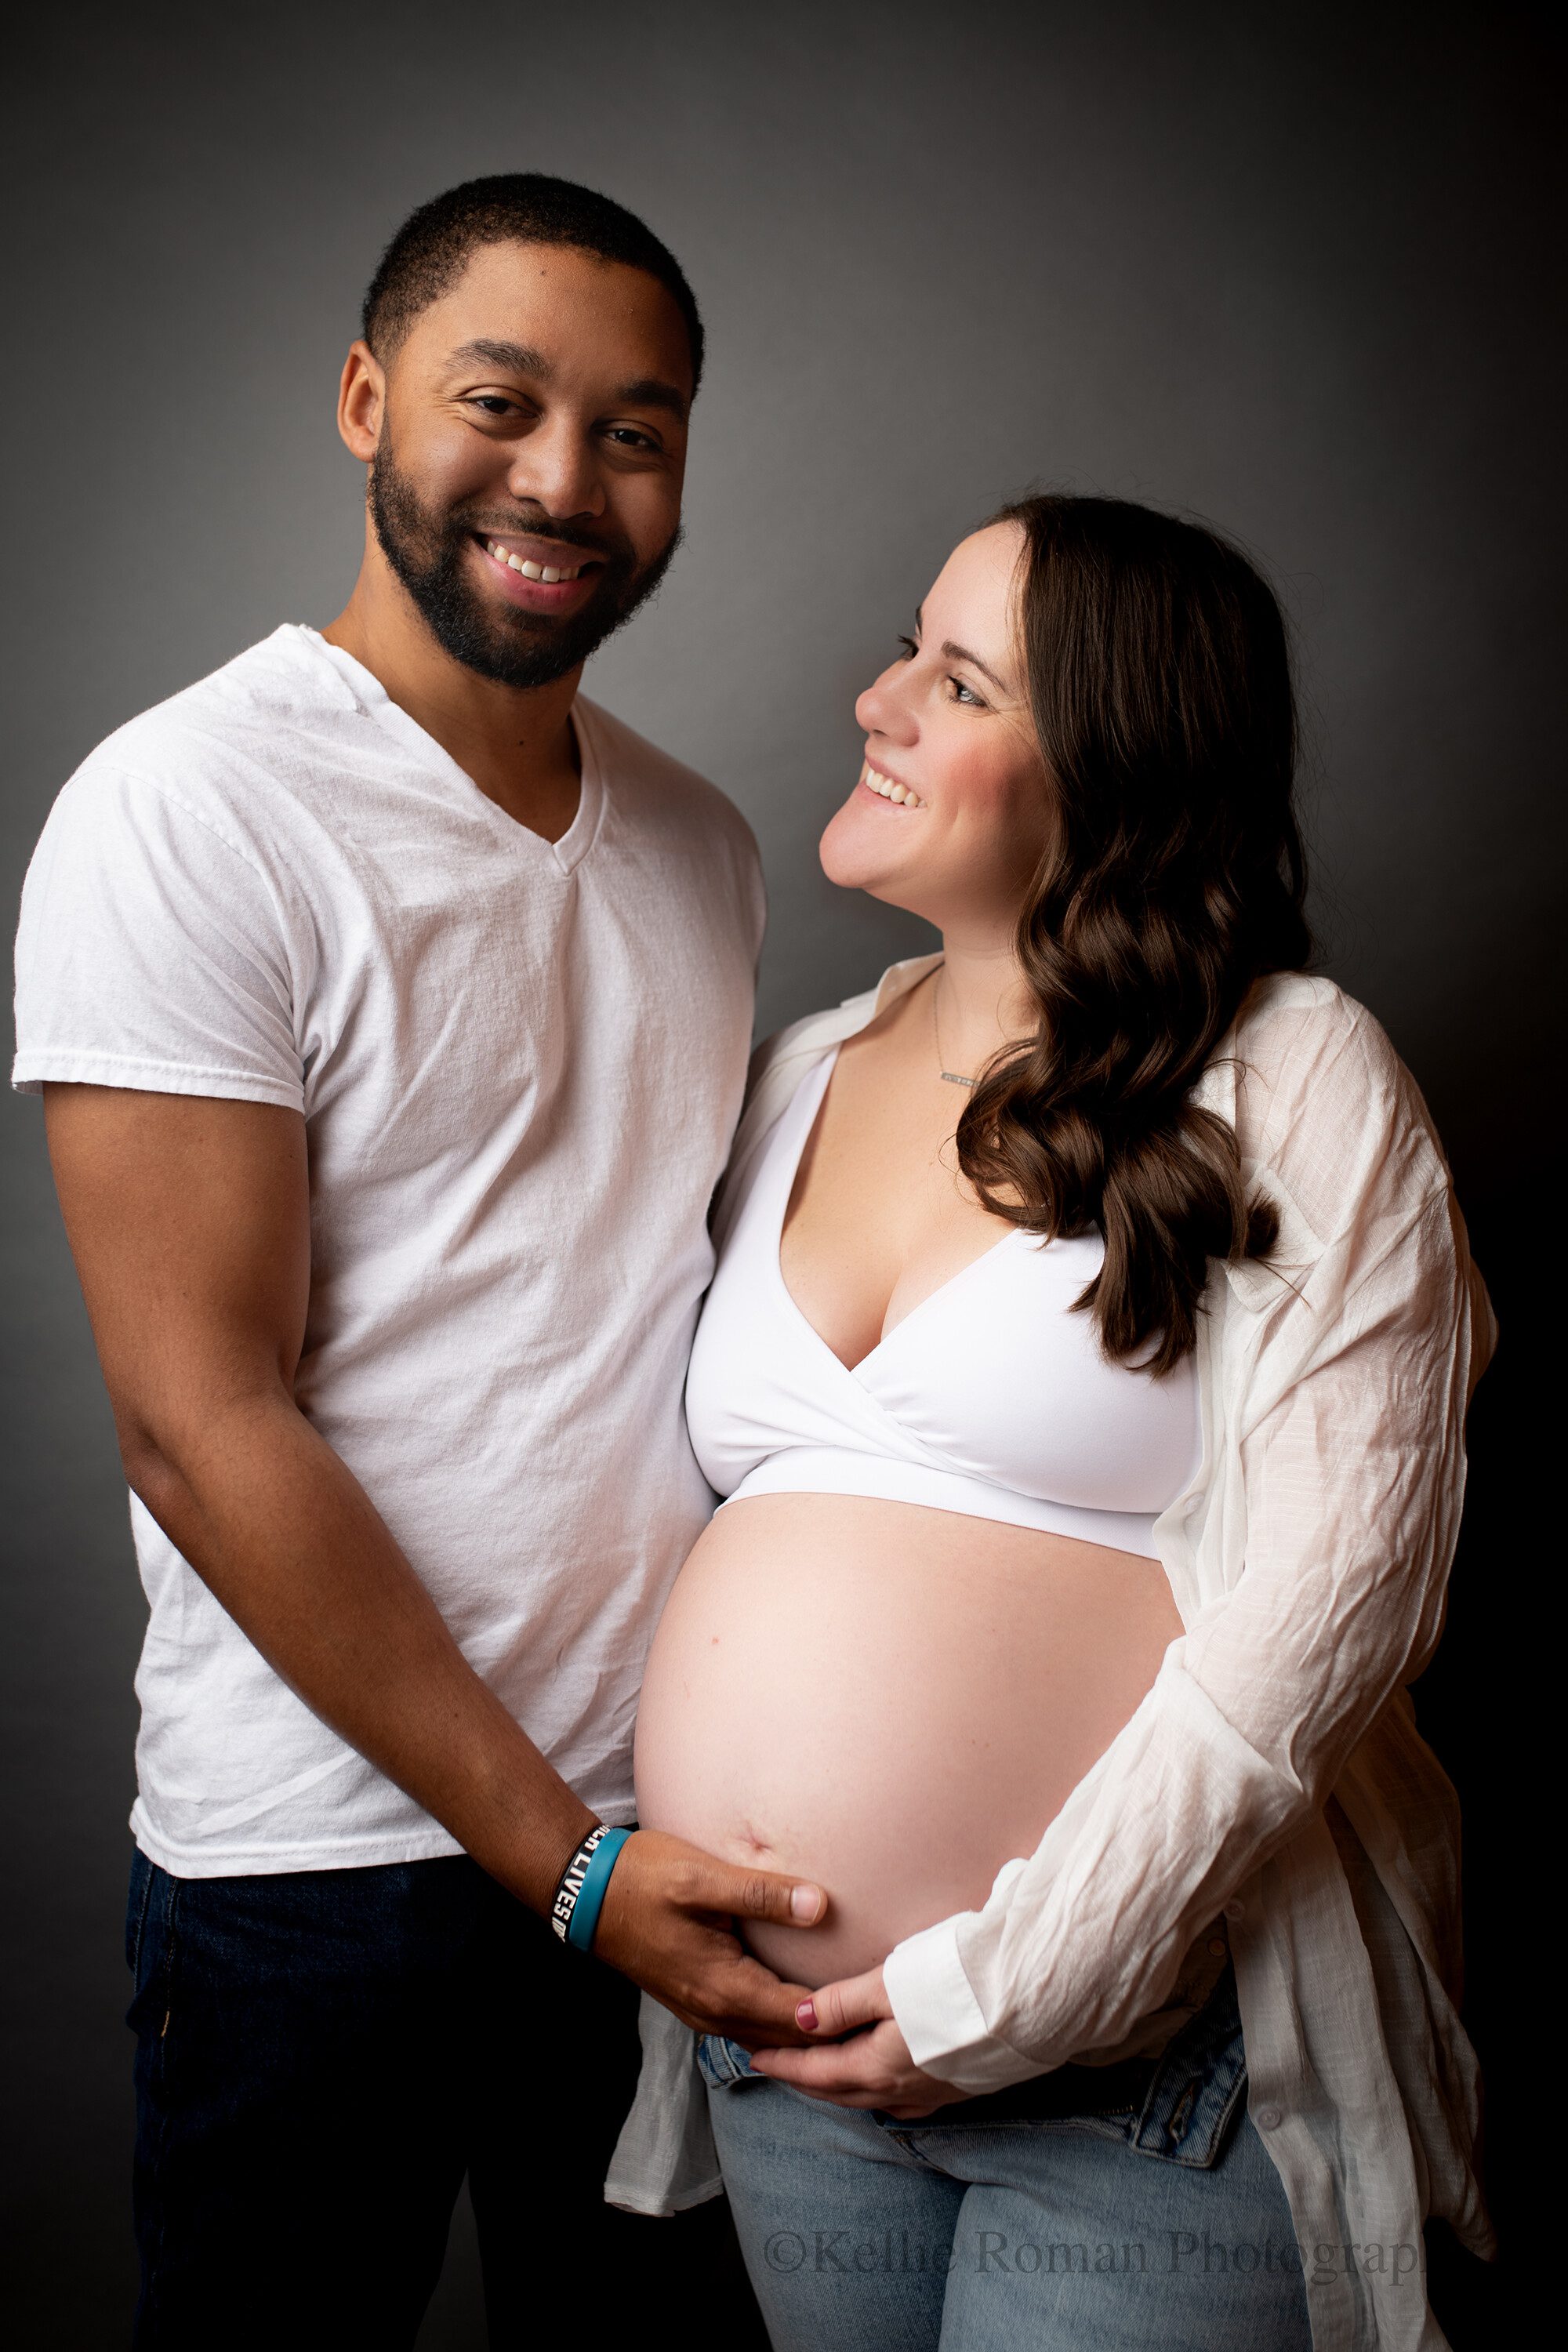 milwaukee area photographersa husband and wife in milwaukee photographer studio. they are wearing white t shirts and jeans, smiling and looking at the camera. the women is pregnant with child, and both husband and wife have their hands on her exposed baby belly.